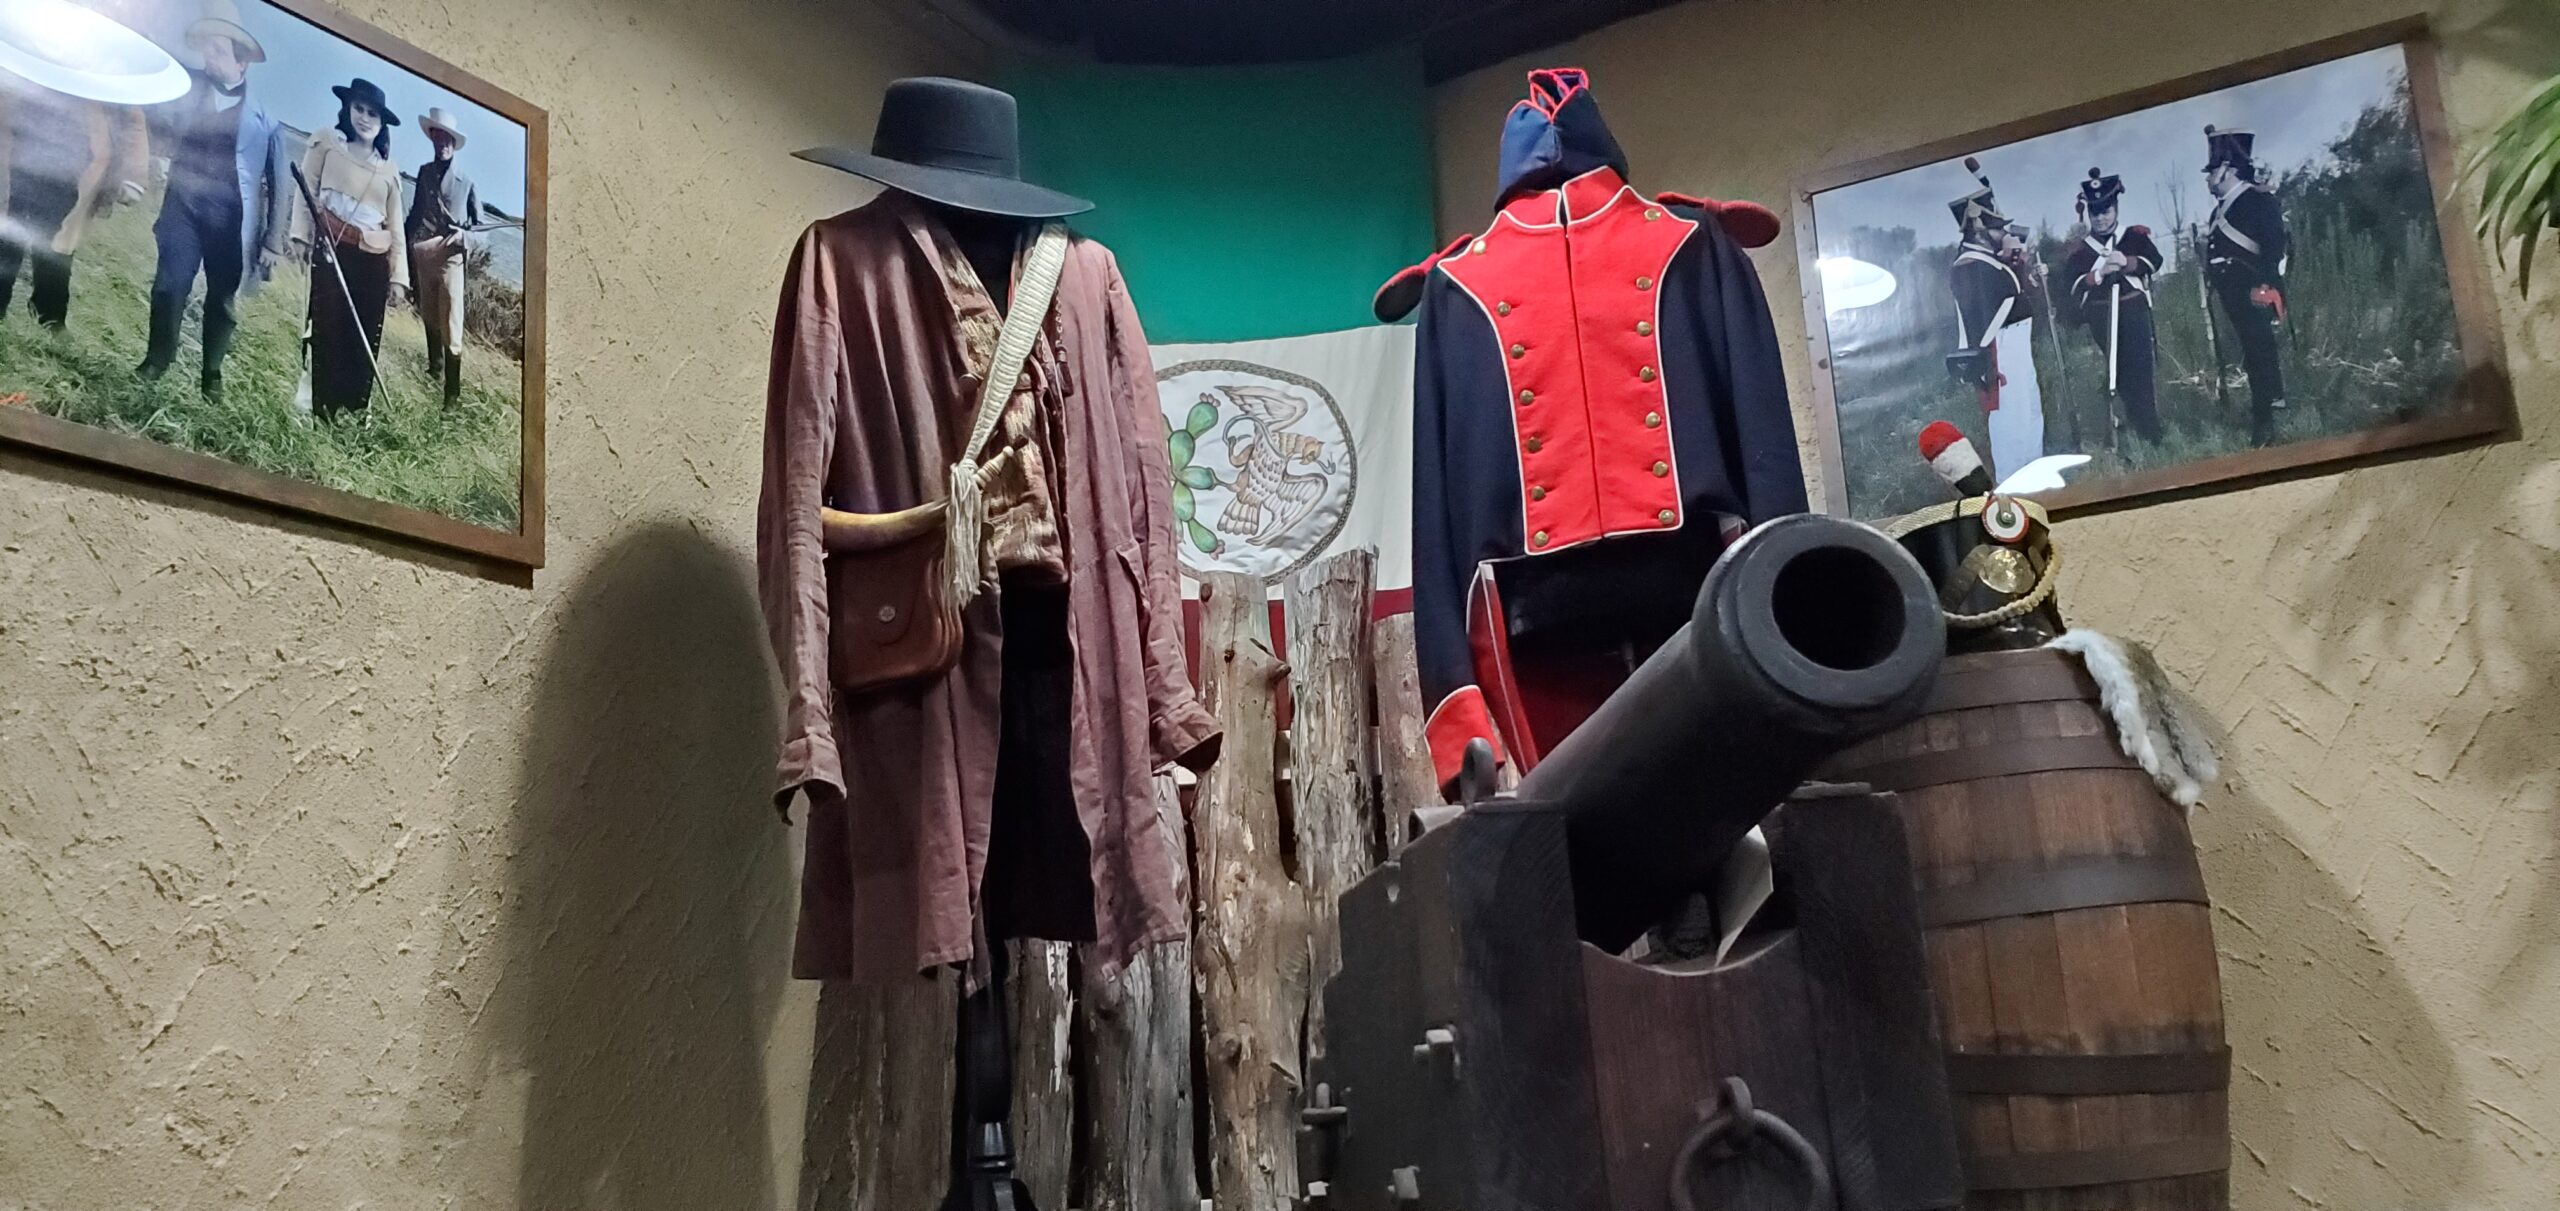 An exhibit showing period clothing, a canon, and photographs